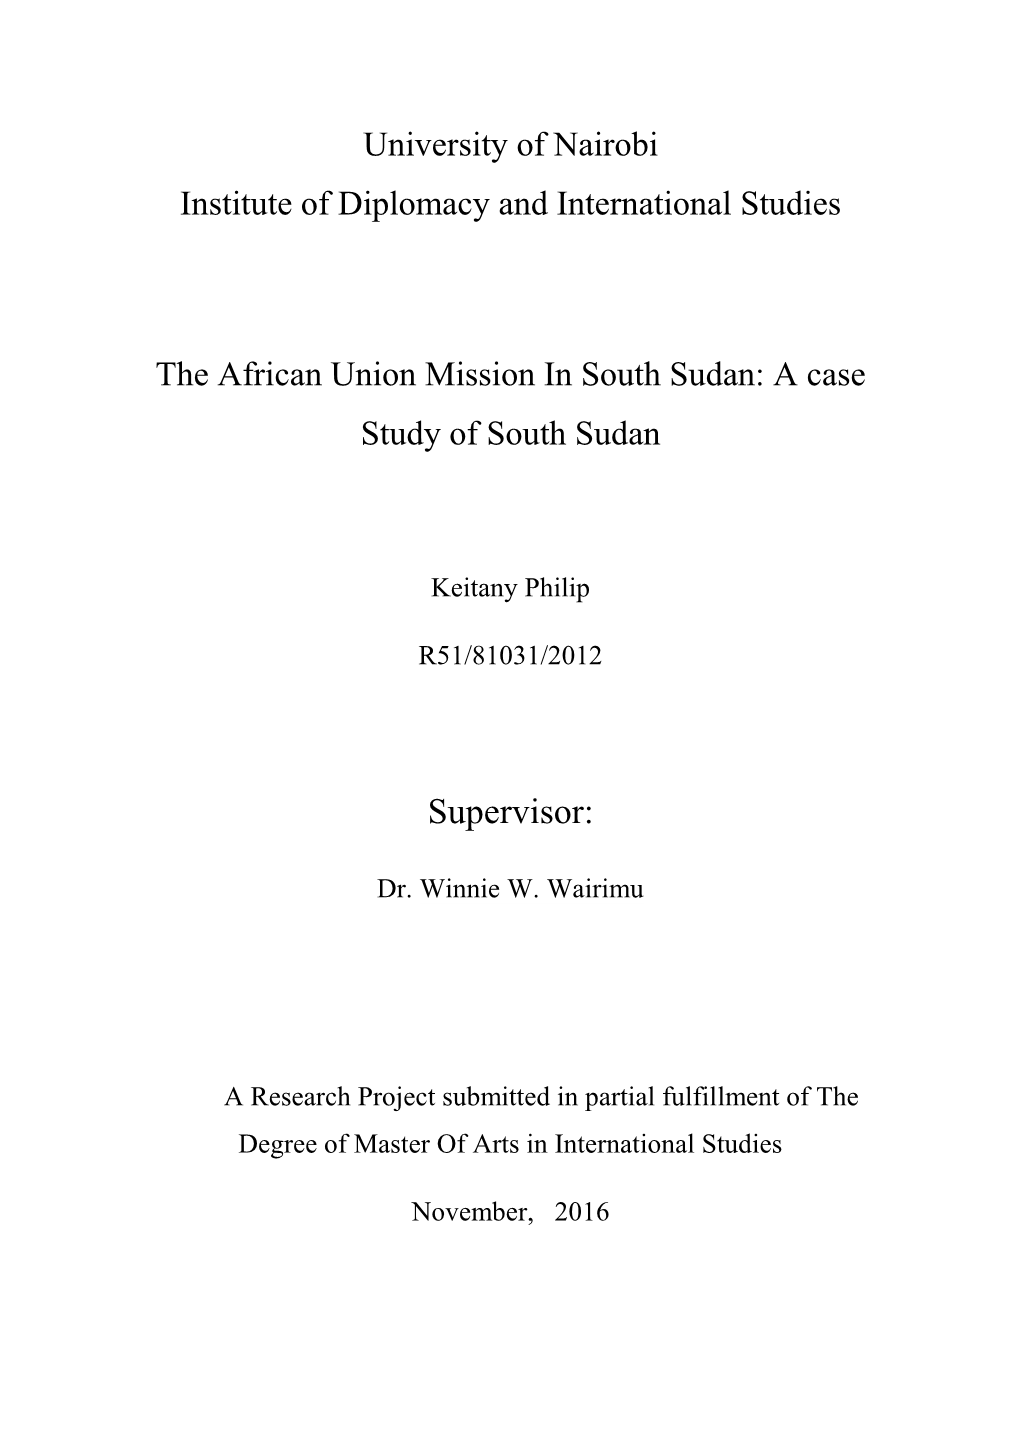 The African Union Mission in South Sudan: a Case Study of South Sudan